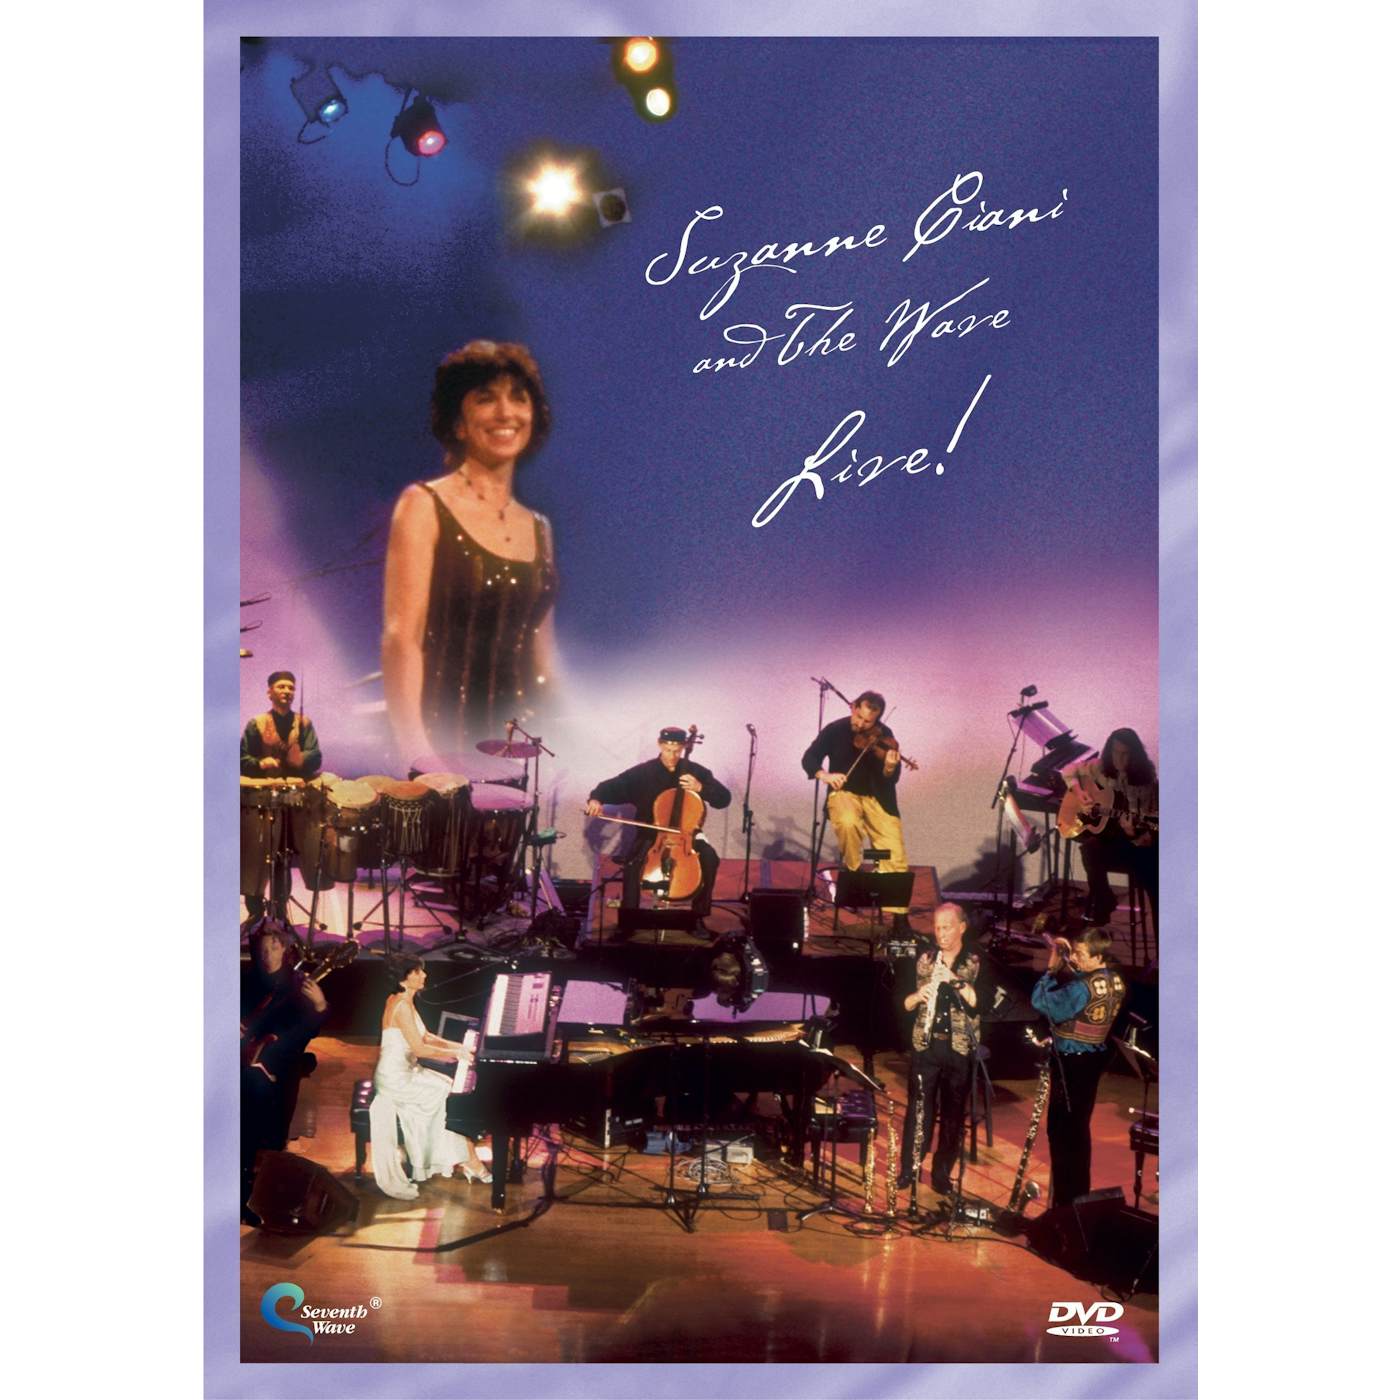 SUZANNE CIANI & THE WAVE: LIVE DVD